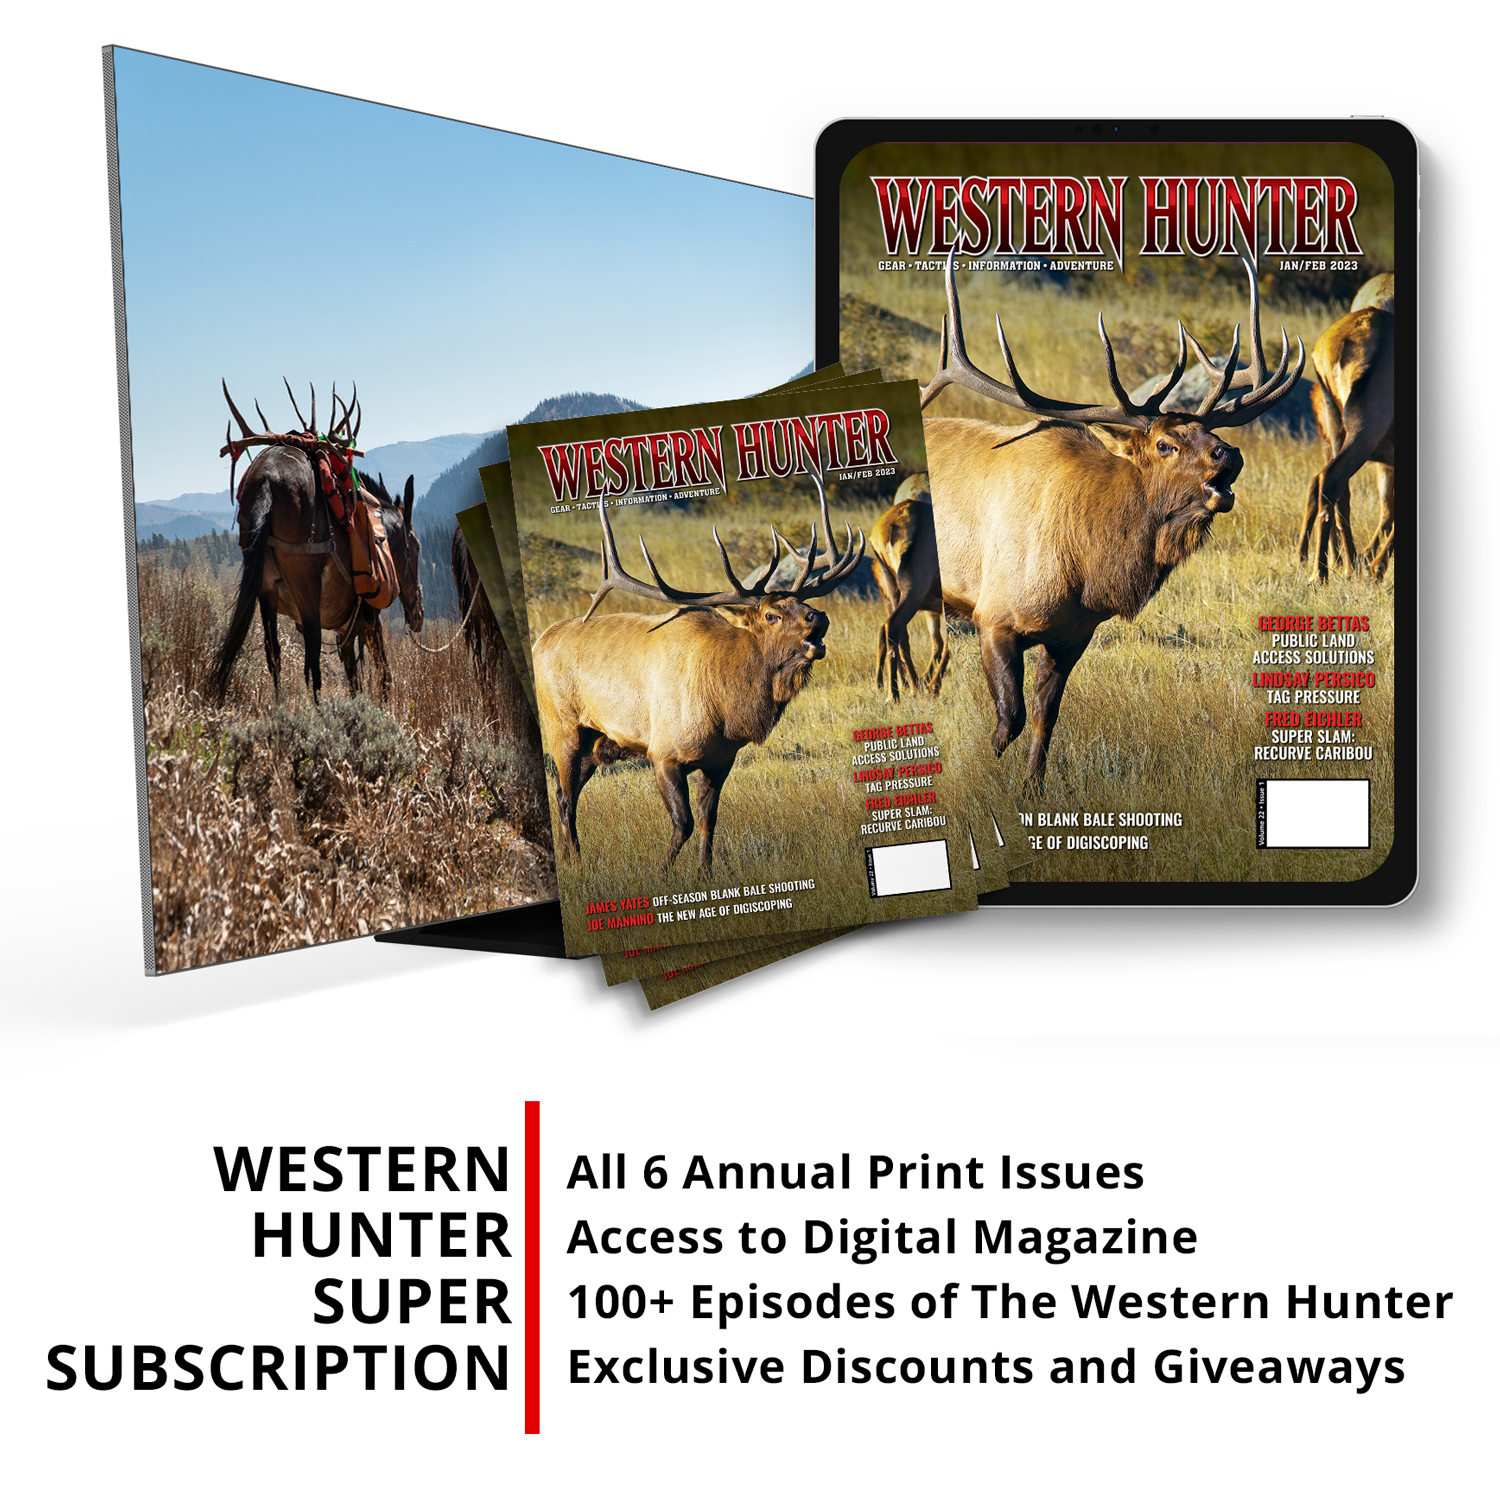 Bear Hunting Magazine Subscription Discount 43%